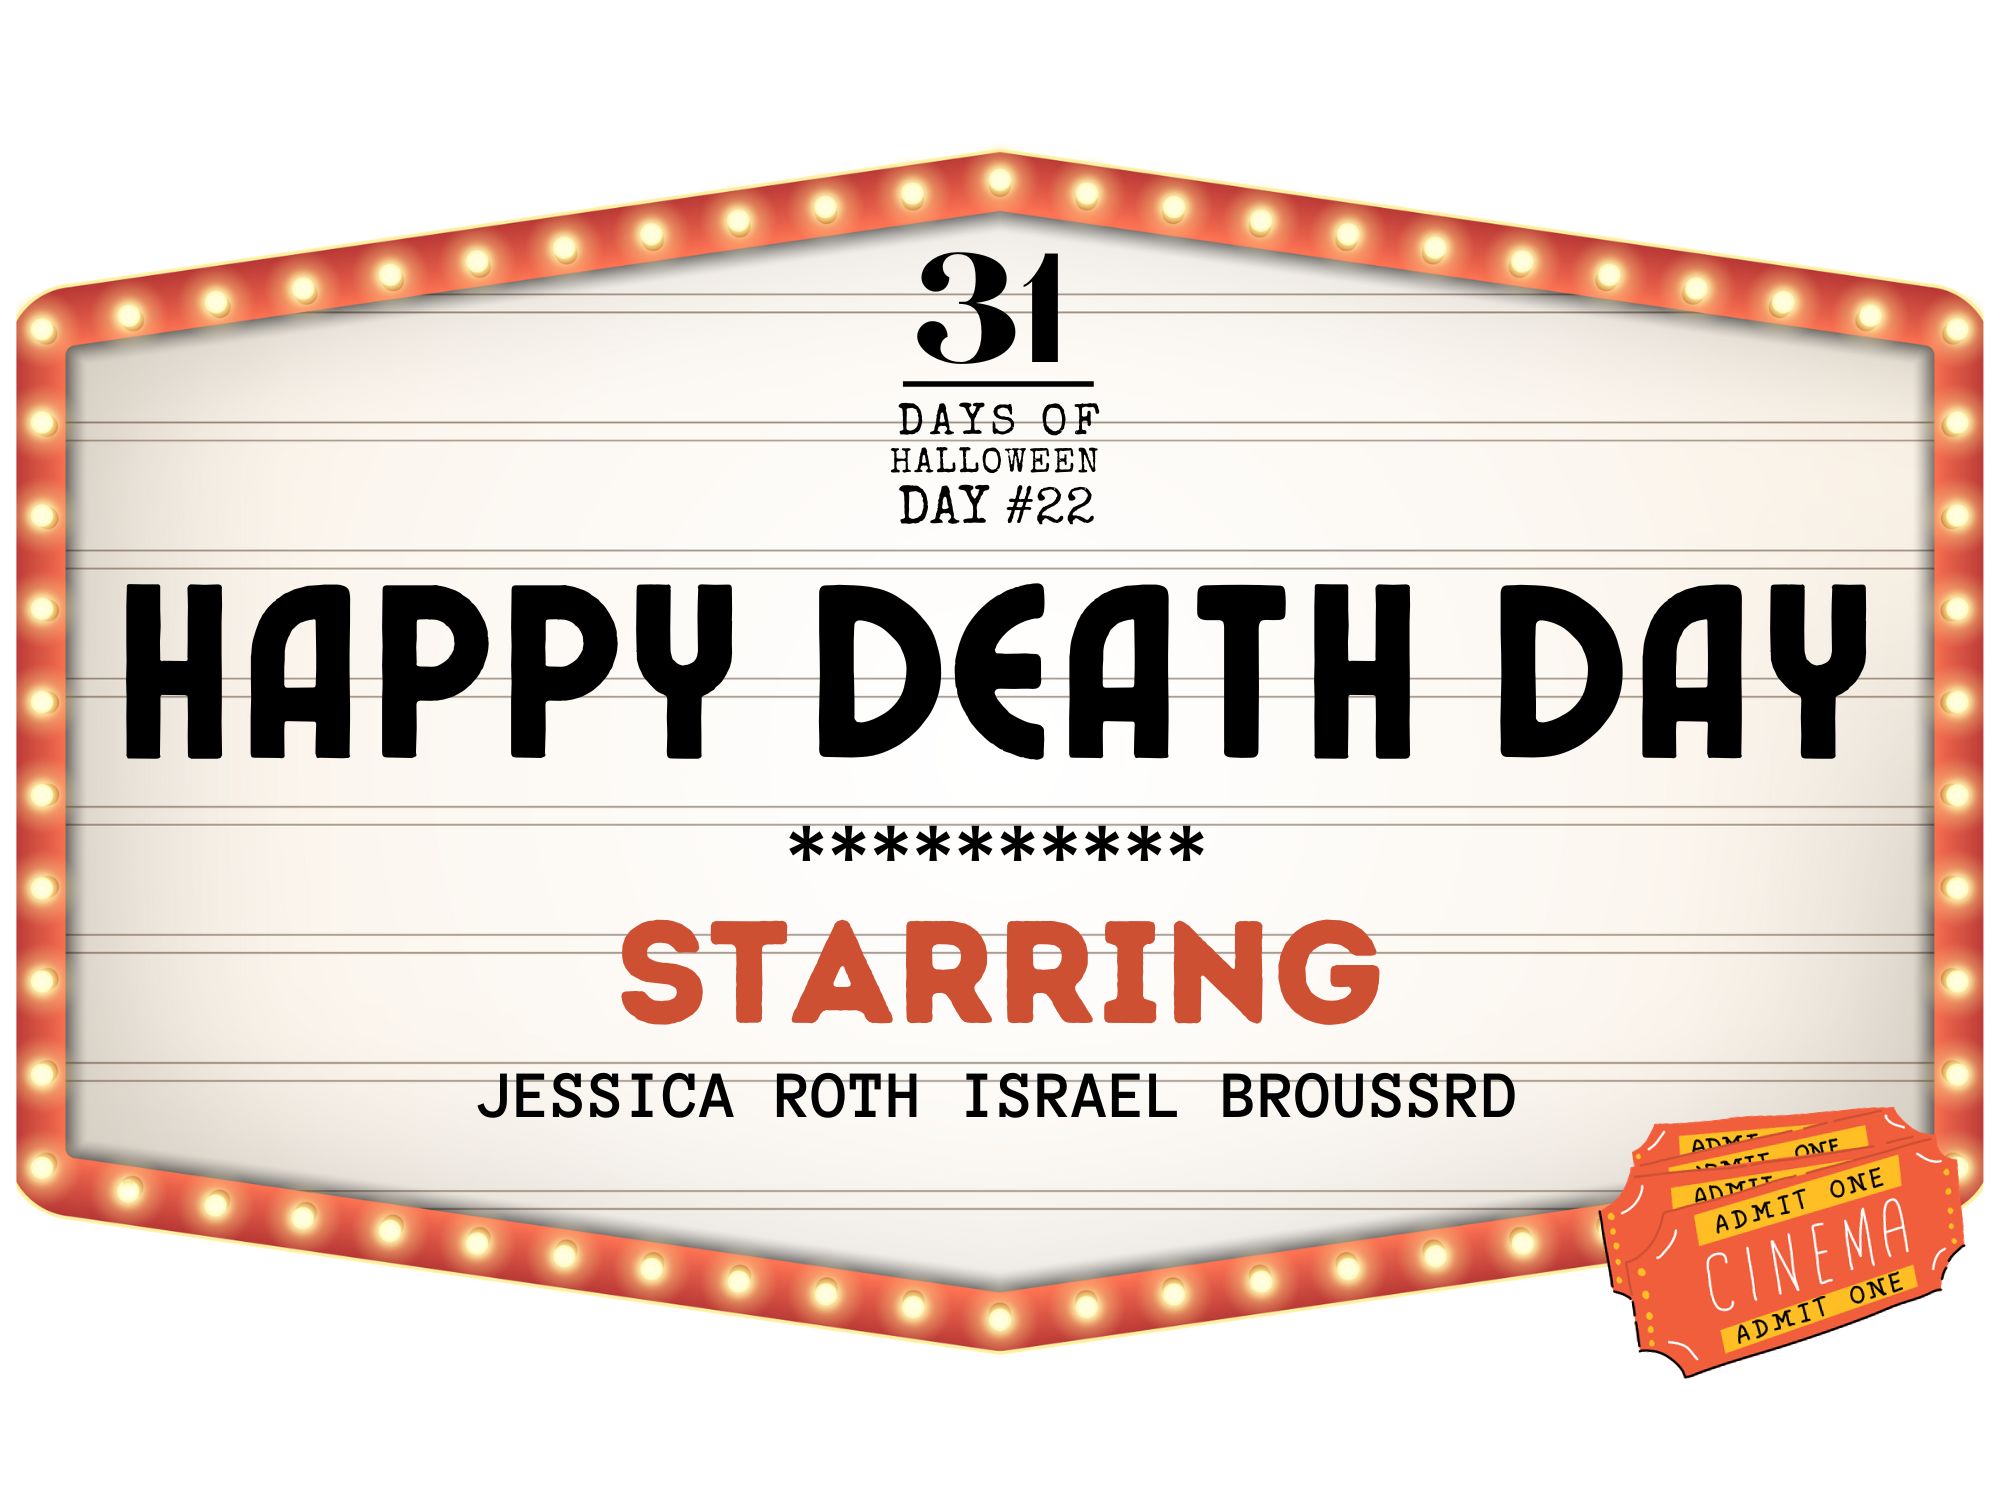 31 Days of Halloween: Day #22, Happy Death Day